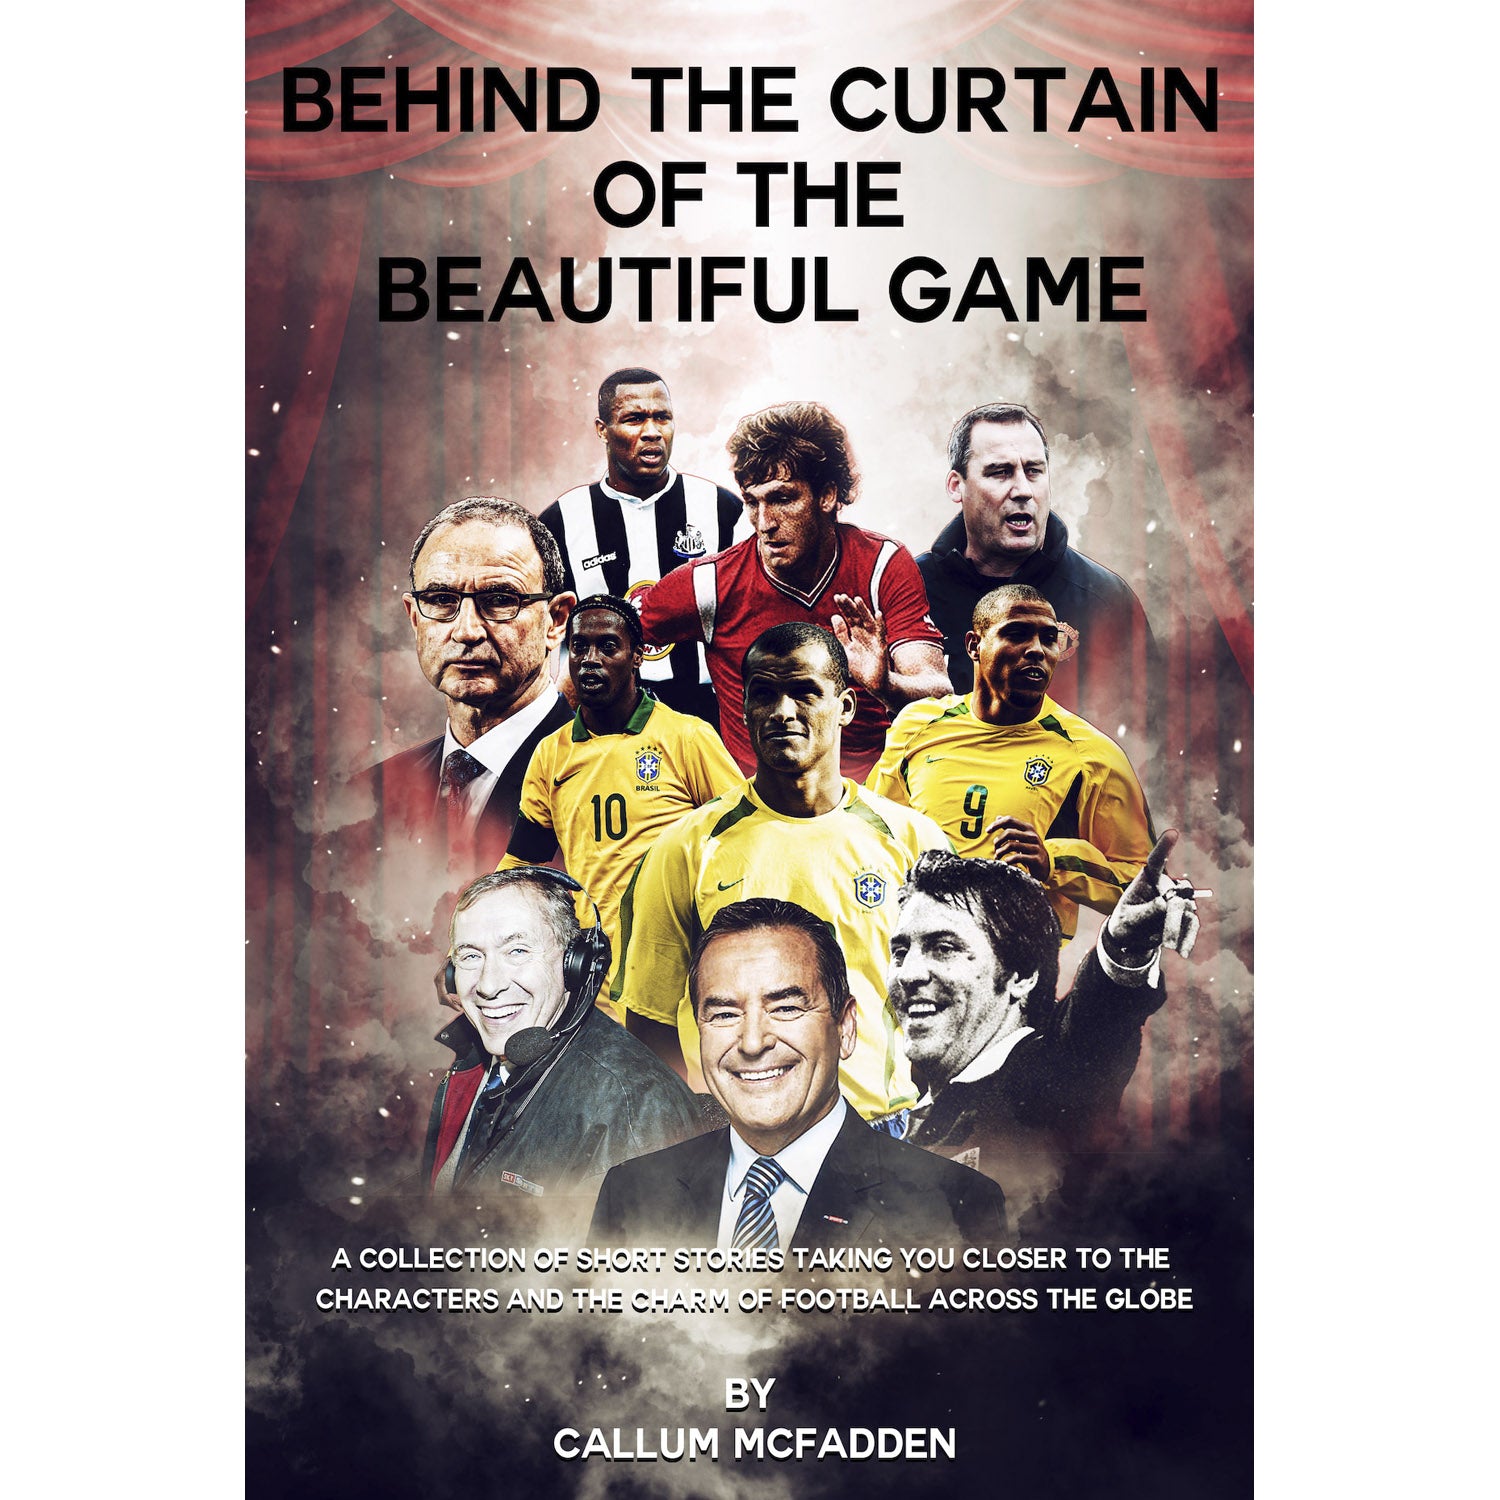 Behind the Curtain of the Beautiful Game